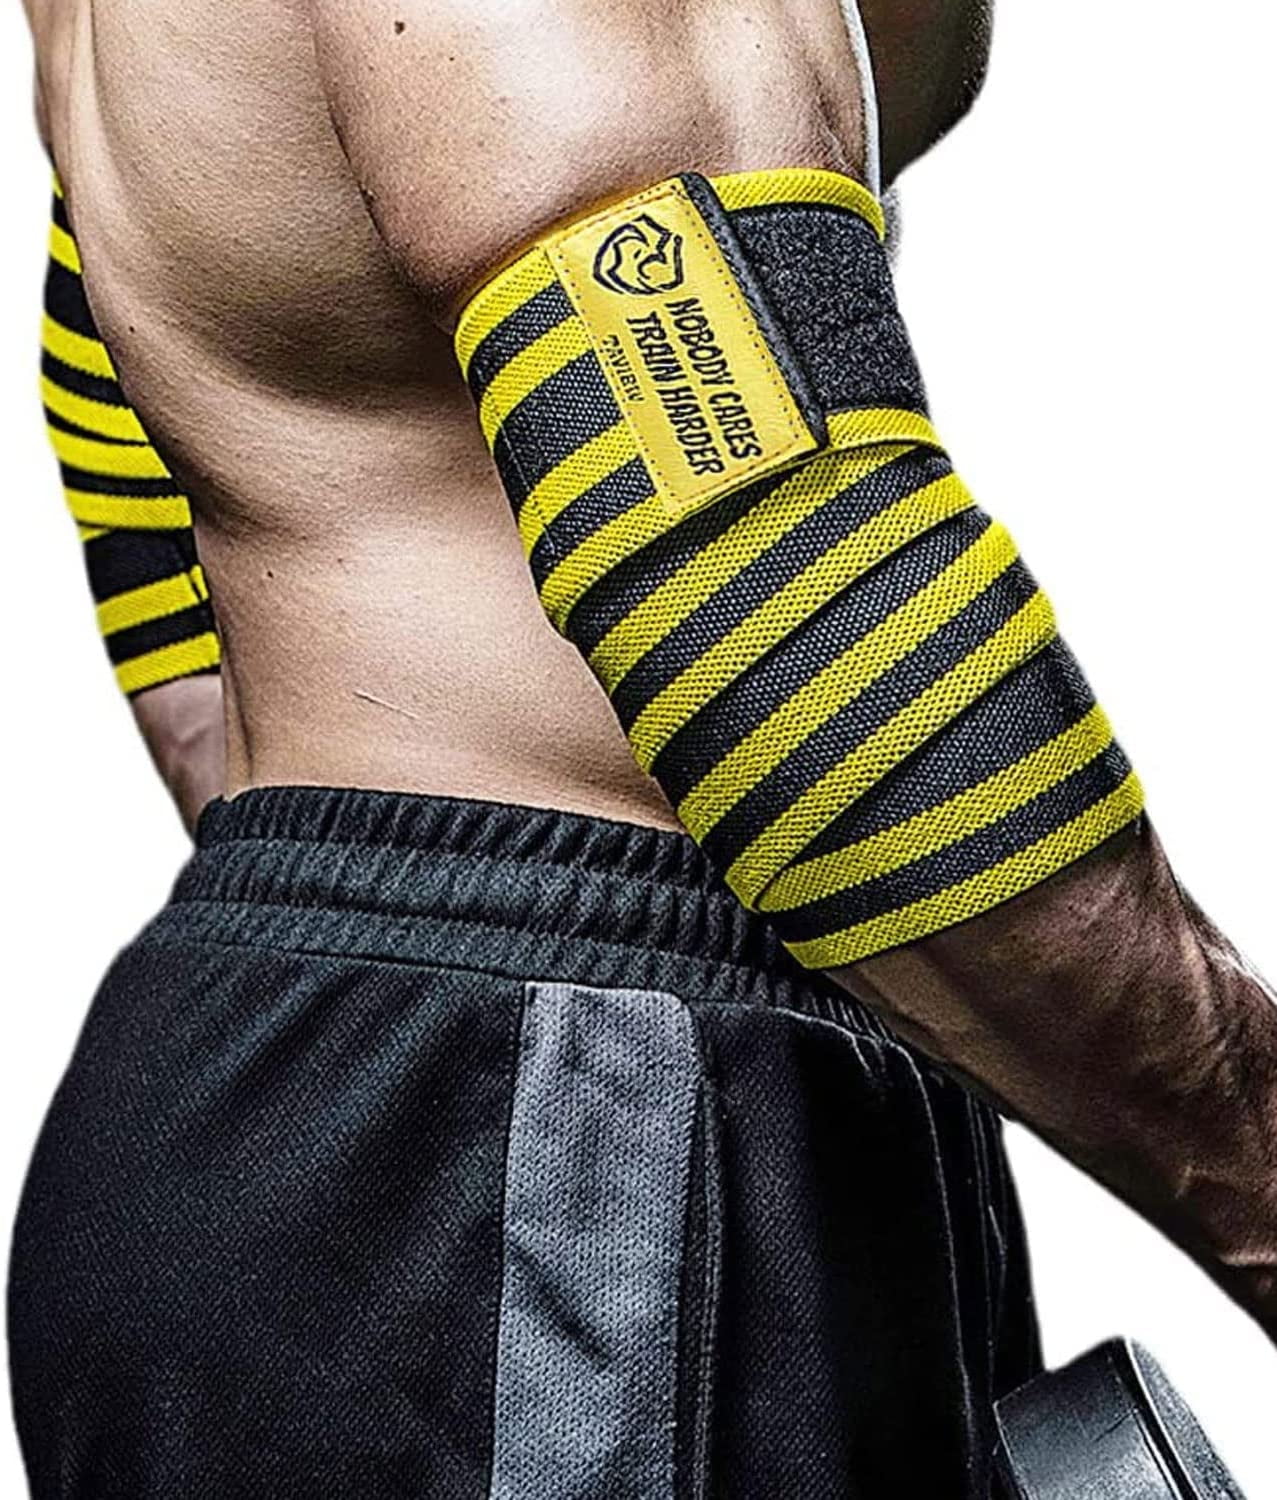 HEAVY DUTY ELBOW SLEEVES SUPPORT WRAPS STRAPS GYM POWER WEIGHT LIFTING PAIR 